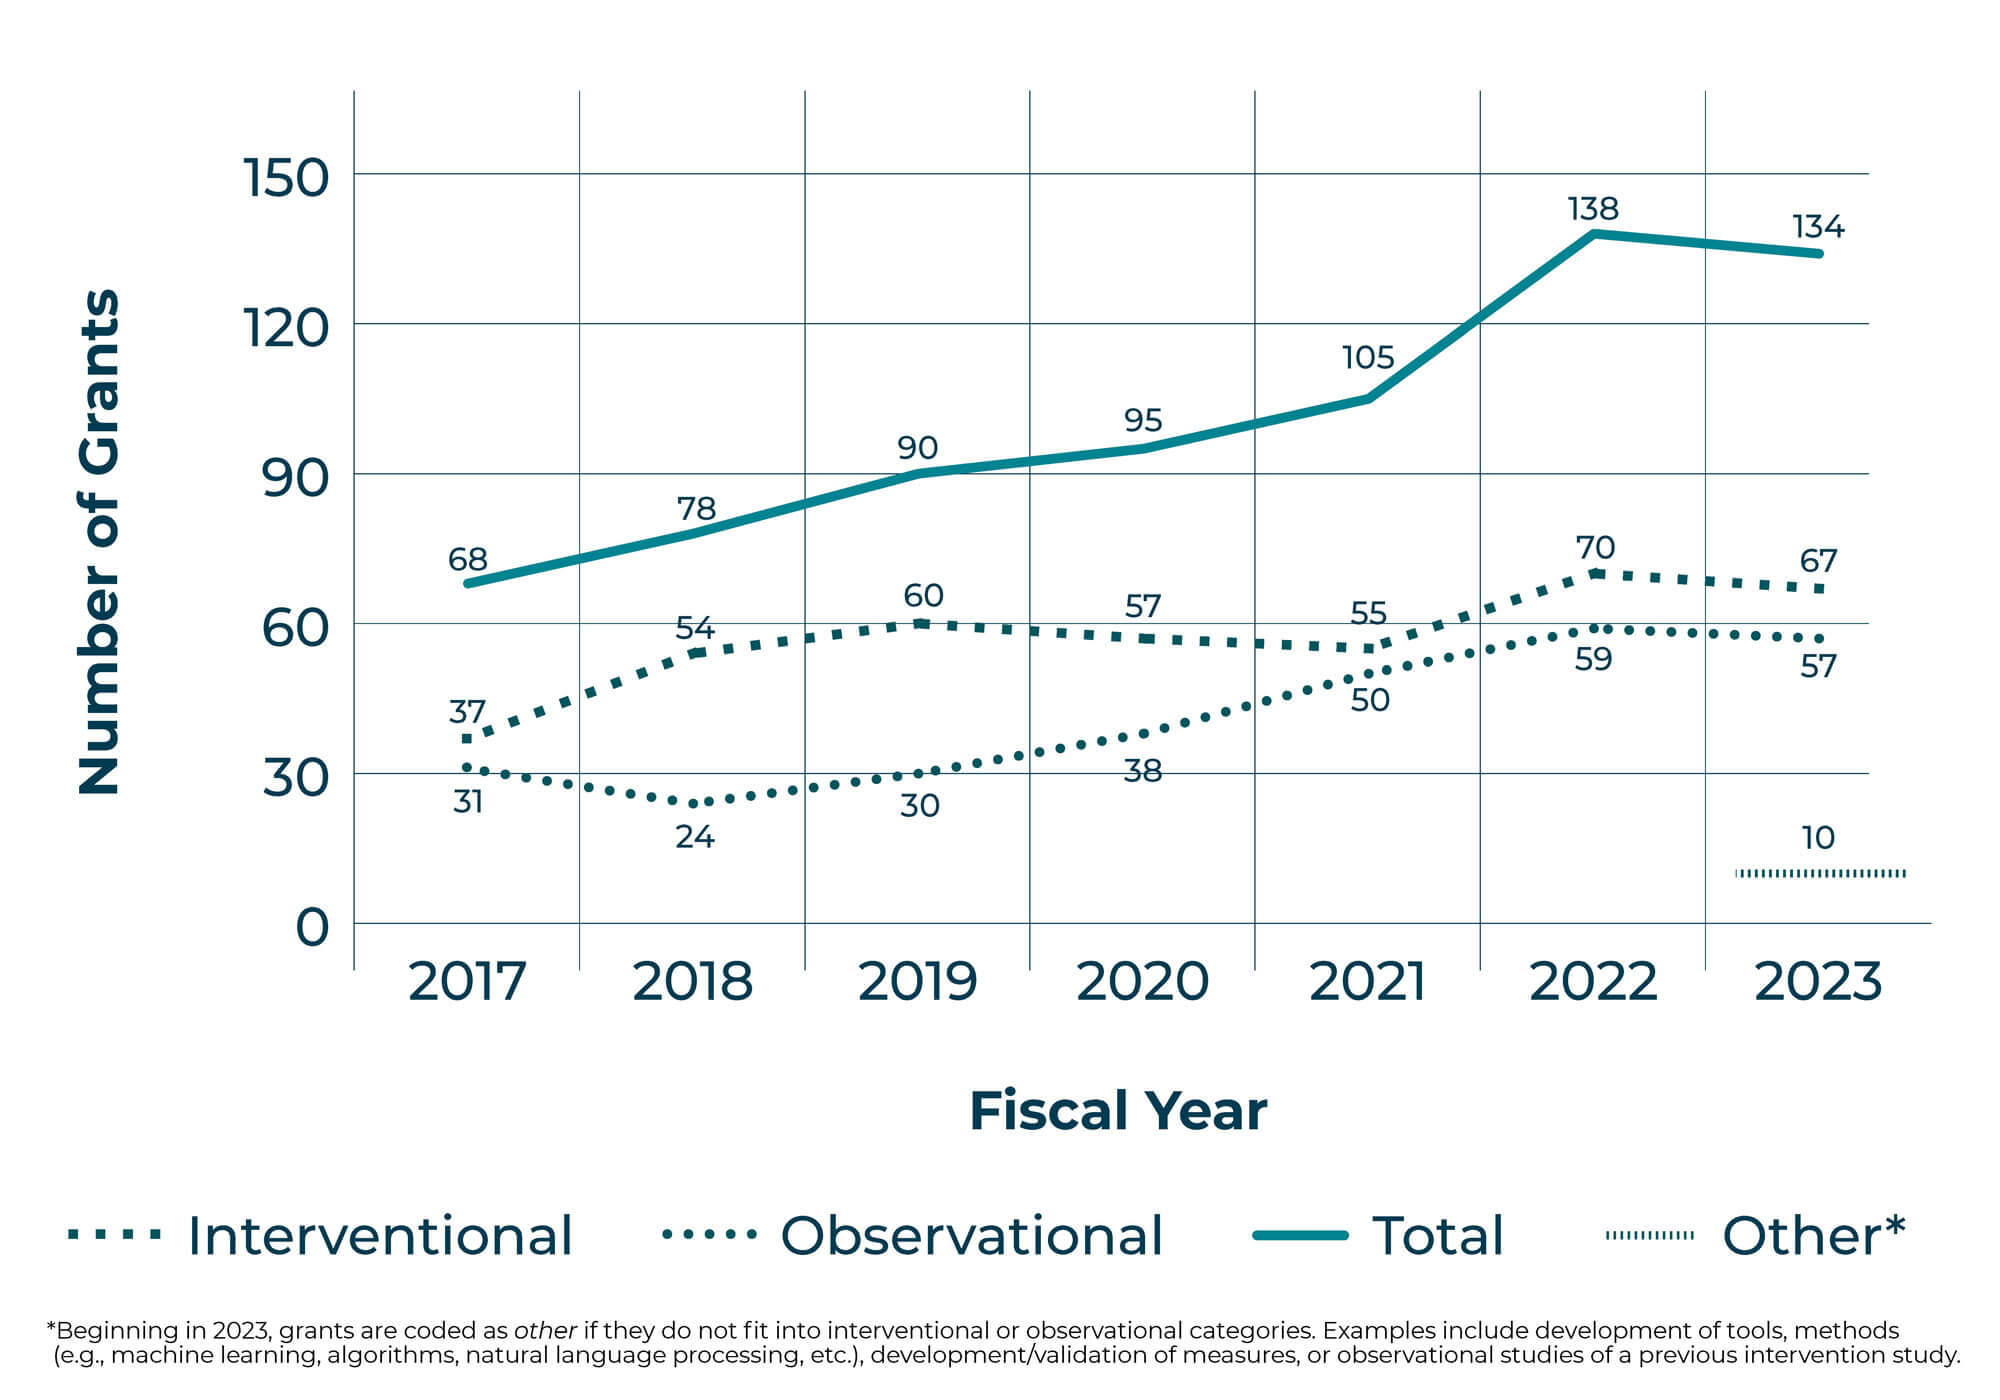 From fiscal year 2017 to fiscal year 2023, the total number of grants increased from 68 to 134. The number of interventional grants increased from 37 to 67, and the number of observational grants increased from 31 to 57.